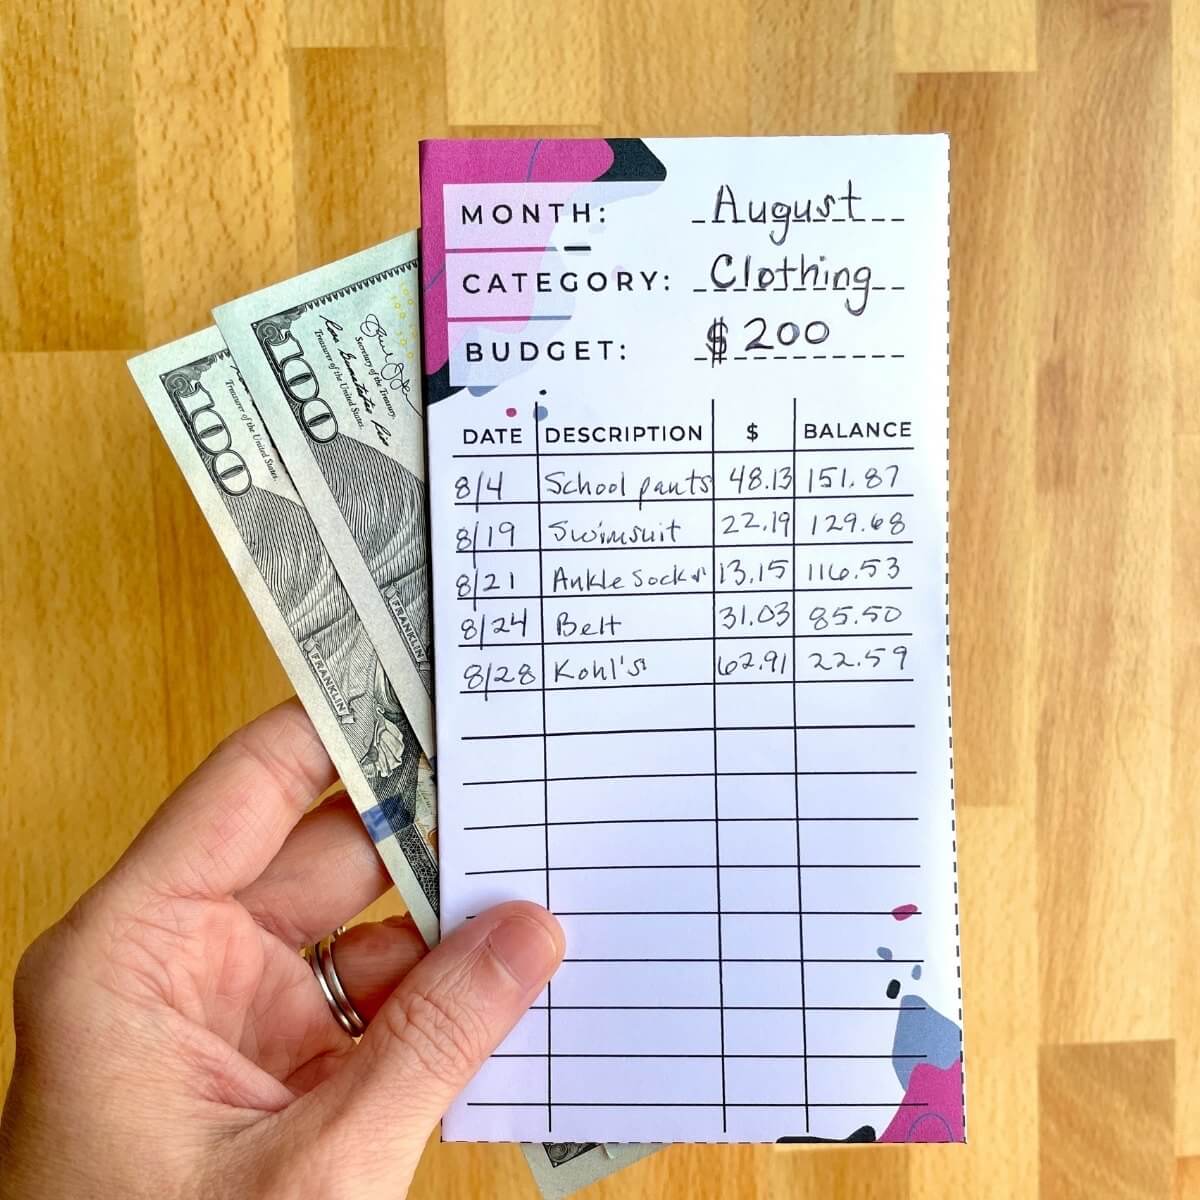 Free Printable Cash Envelope Templates to Help with Budgeting